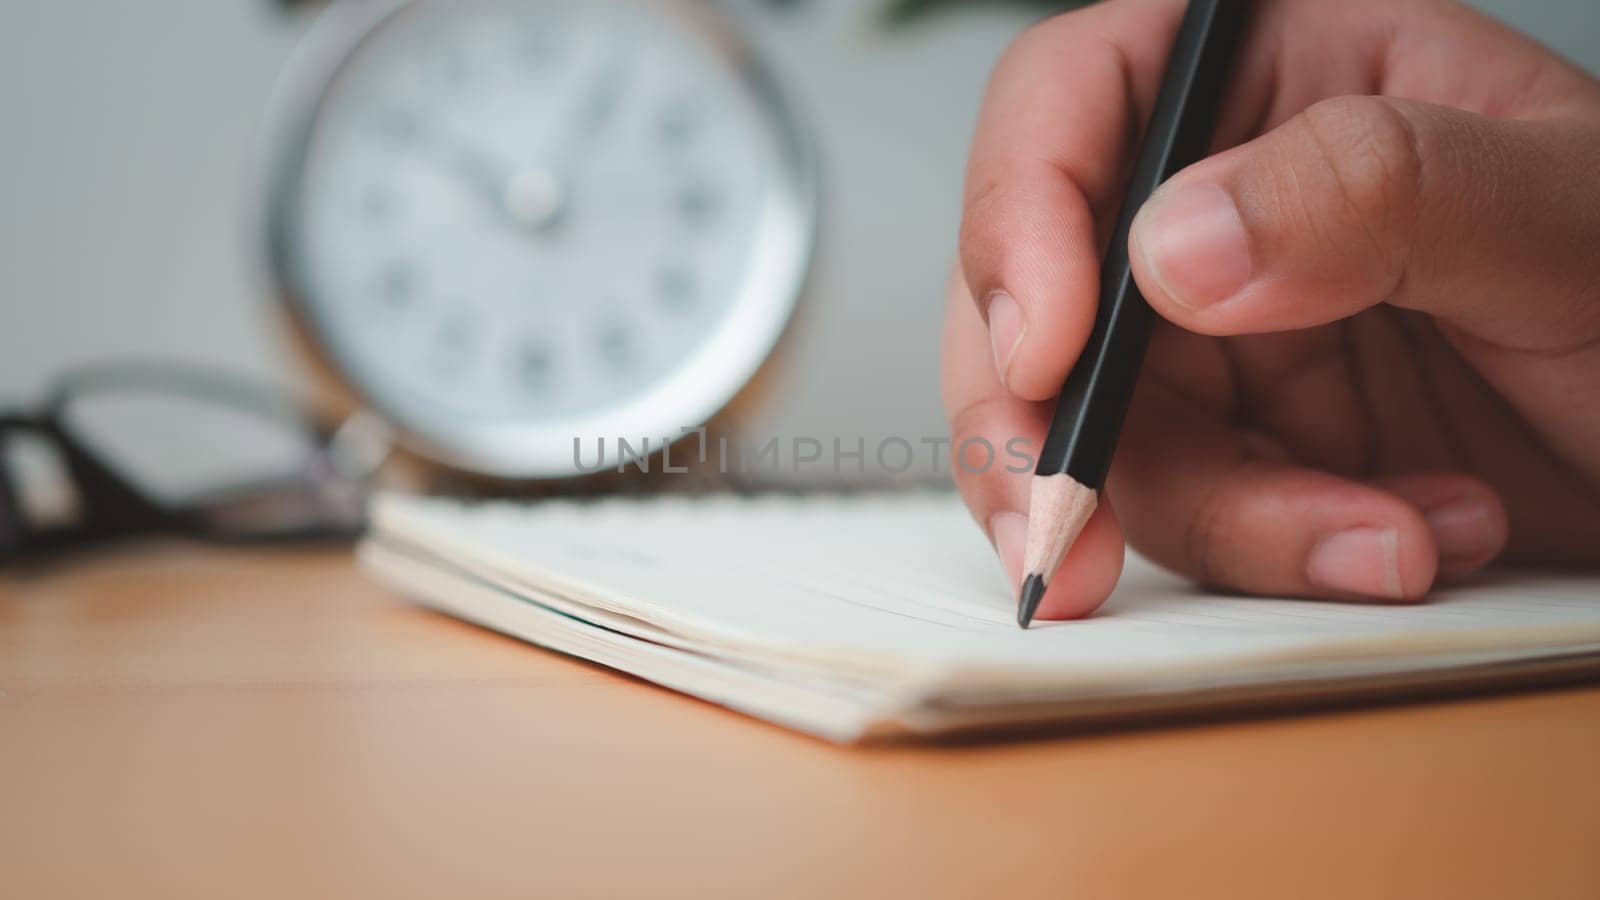 Human hands writing notes with pencil on paper on wooden table surface. by Unimages2527